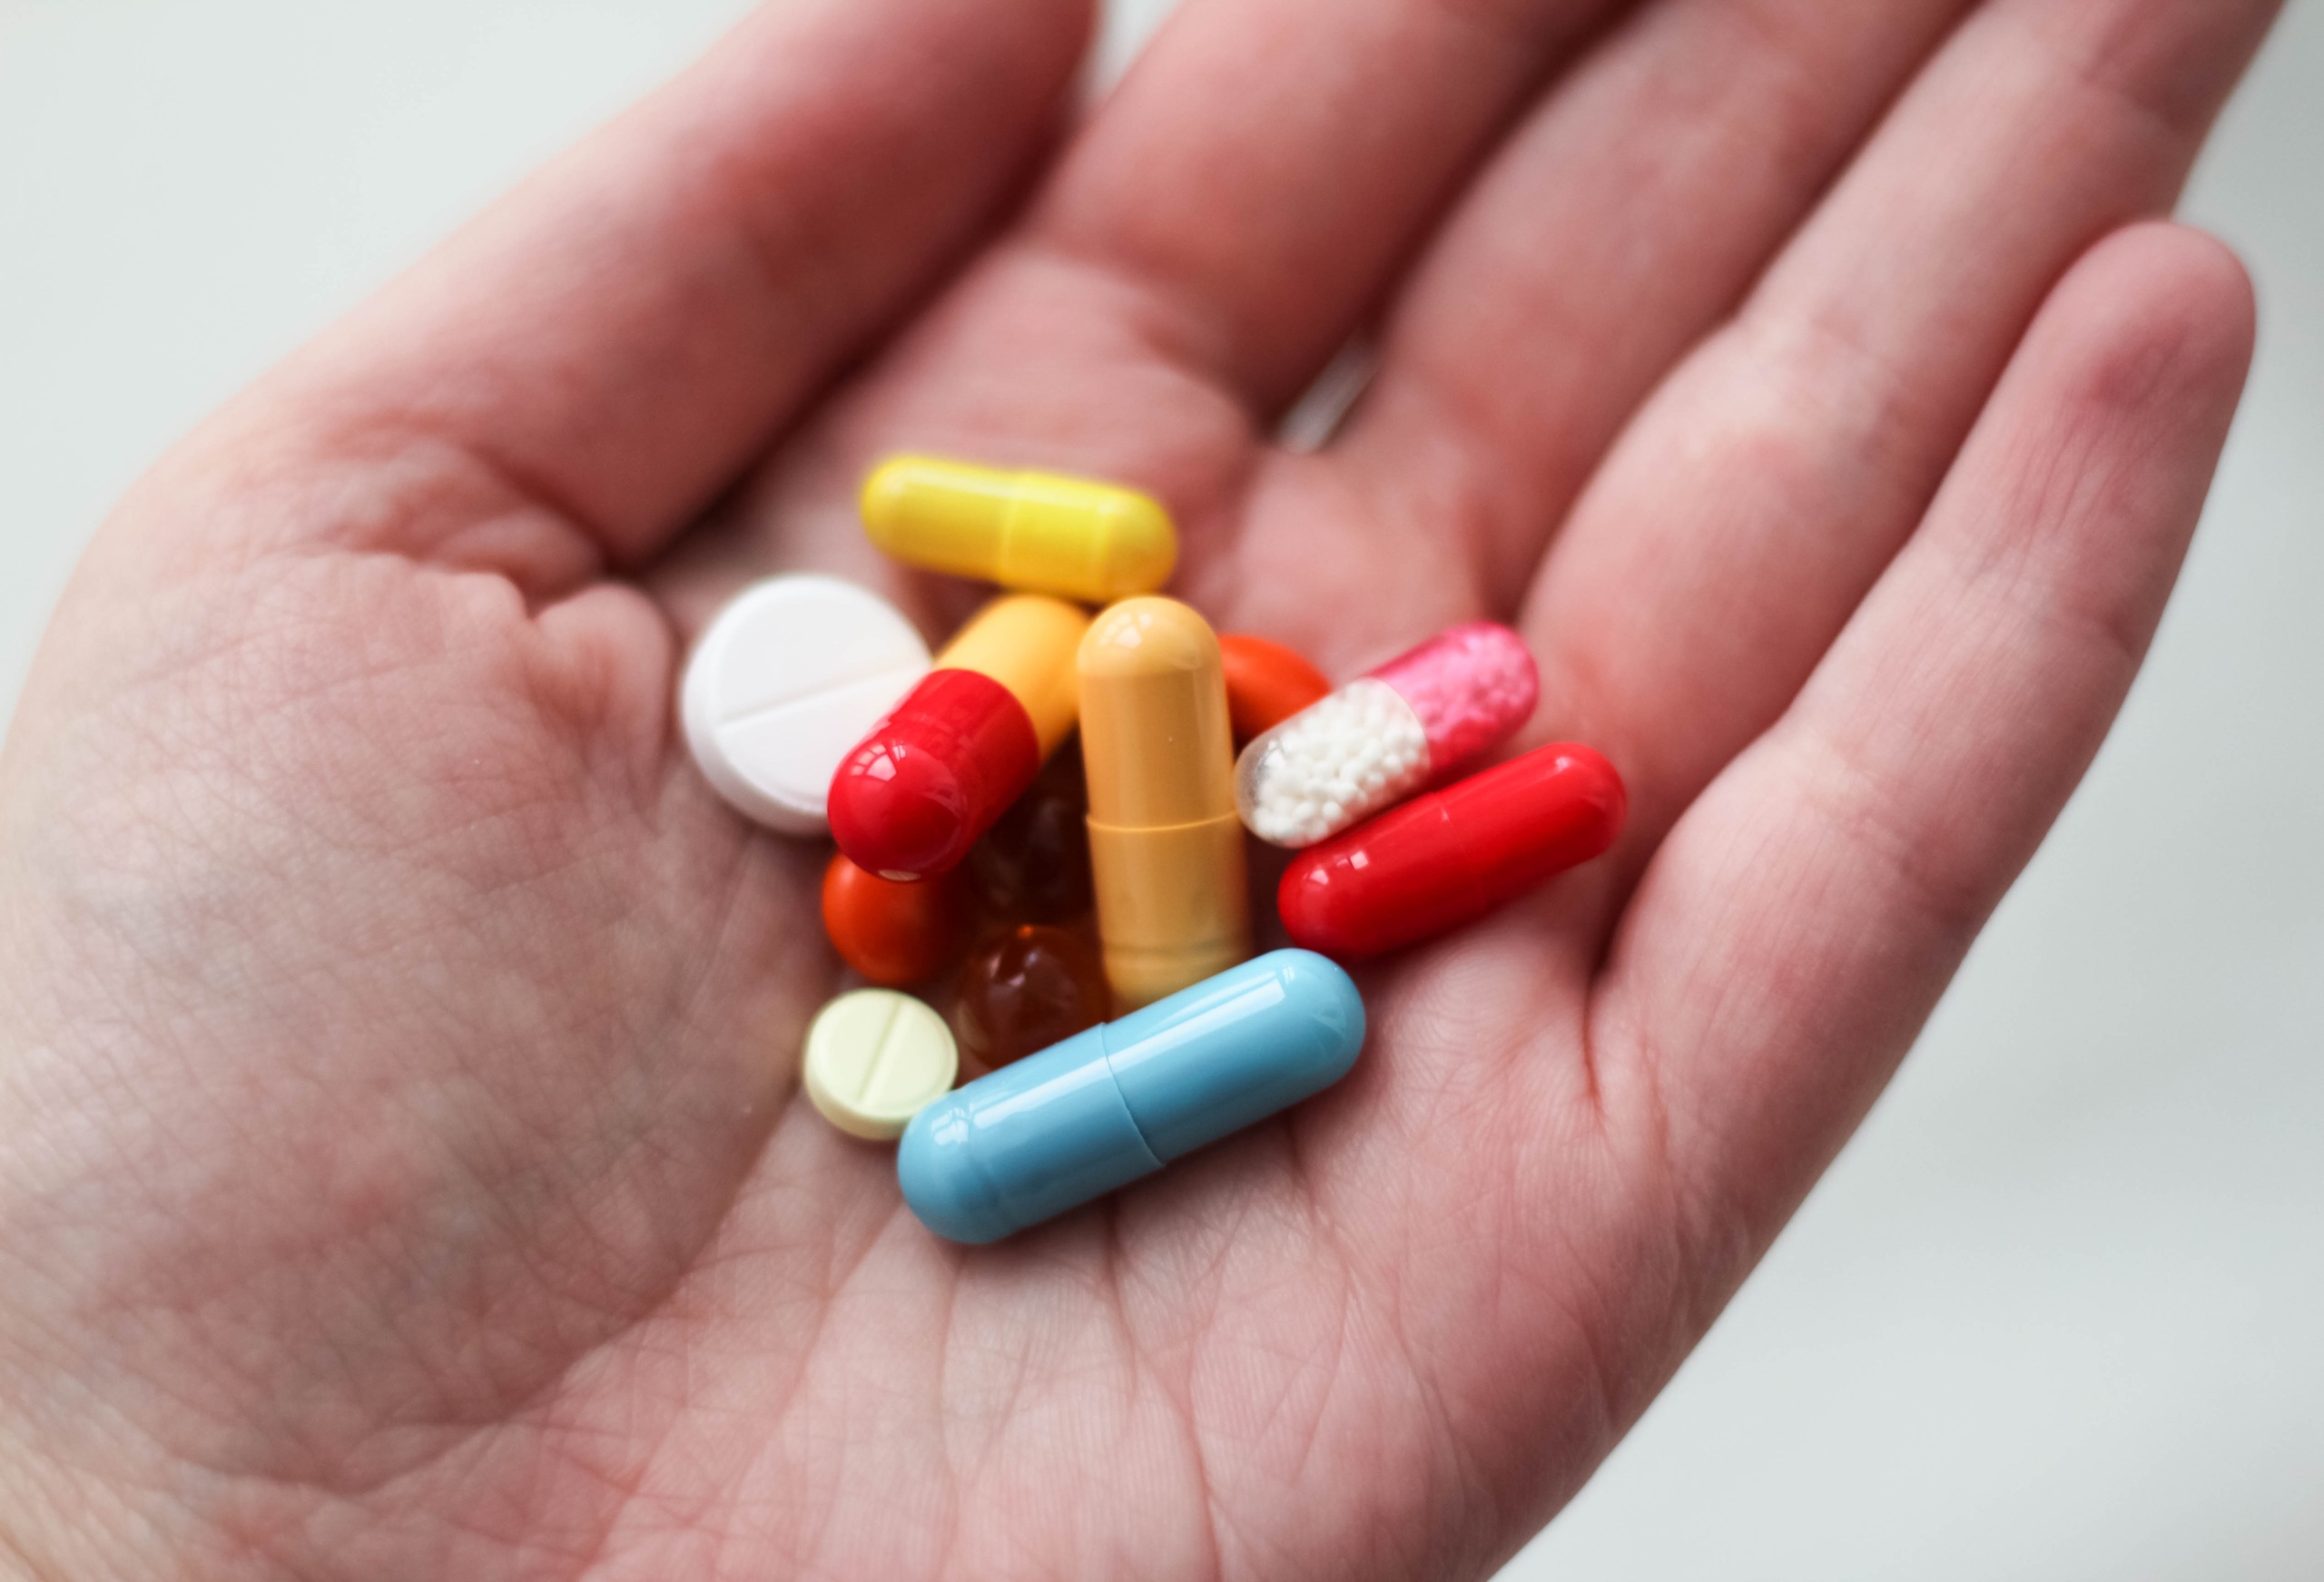 Hand holding multi-colored tablets and capsules